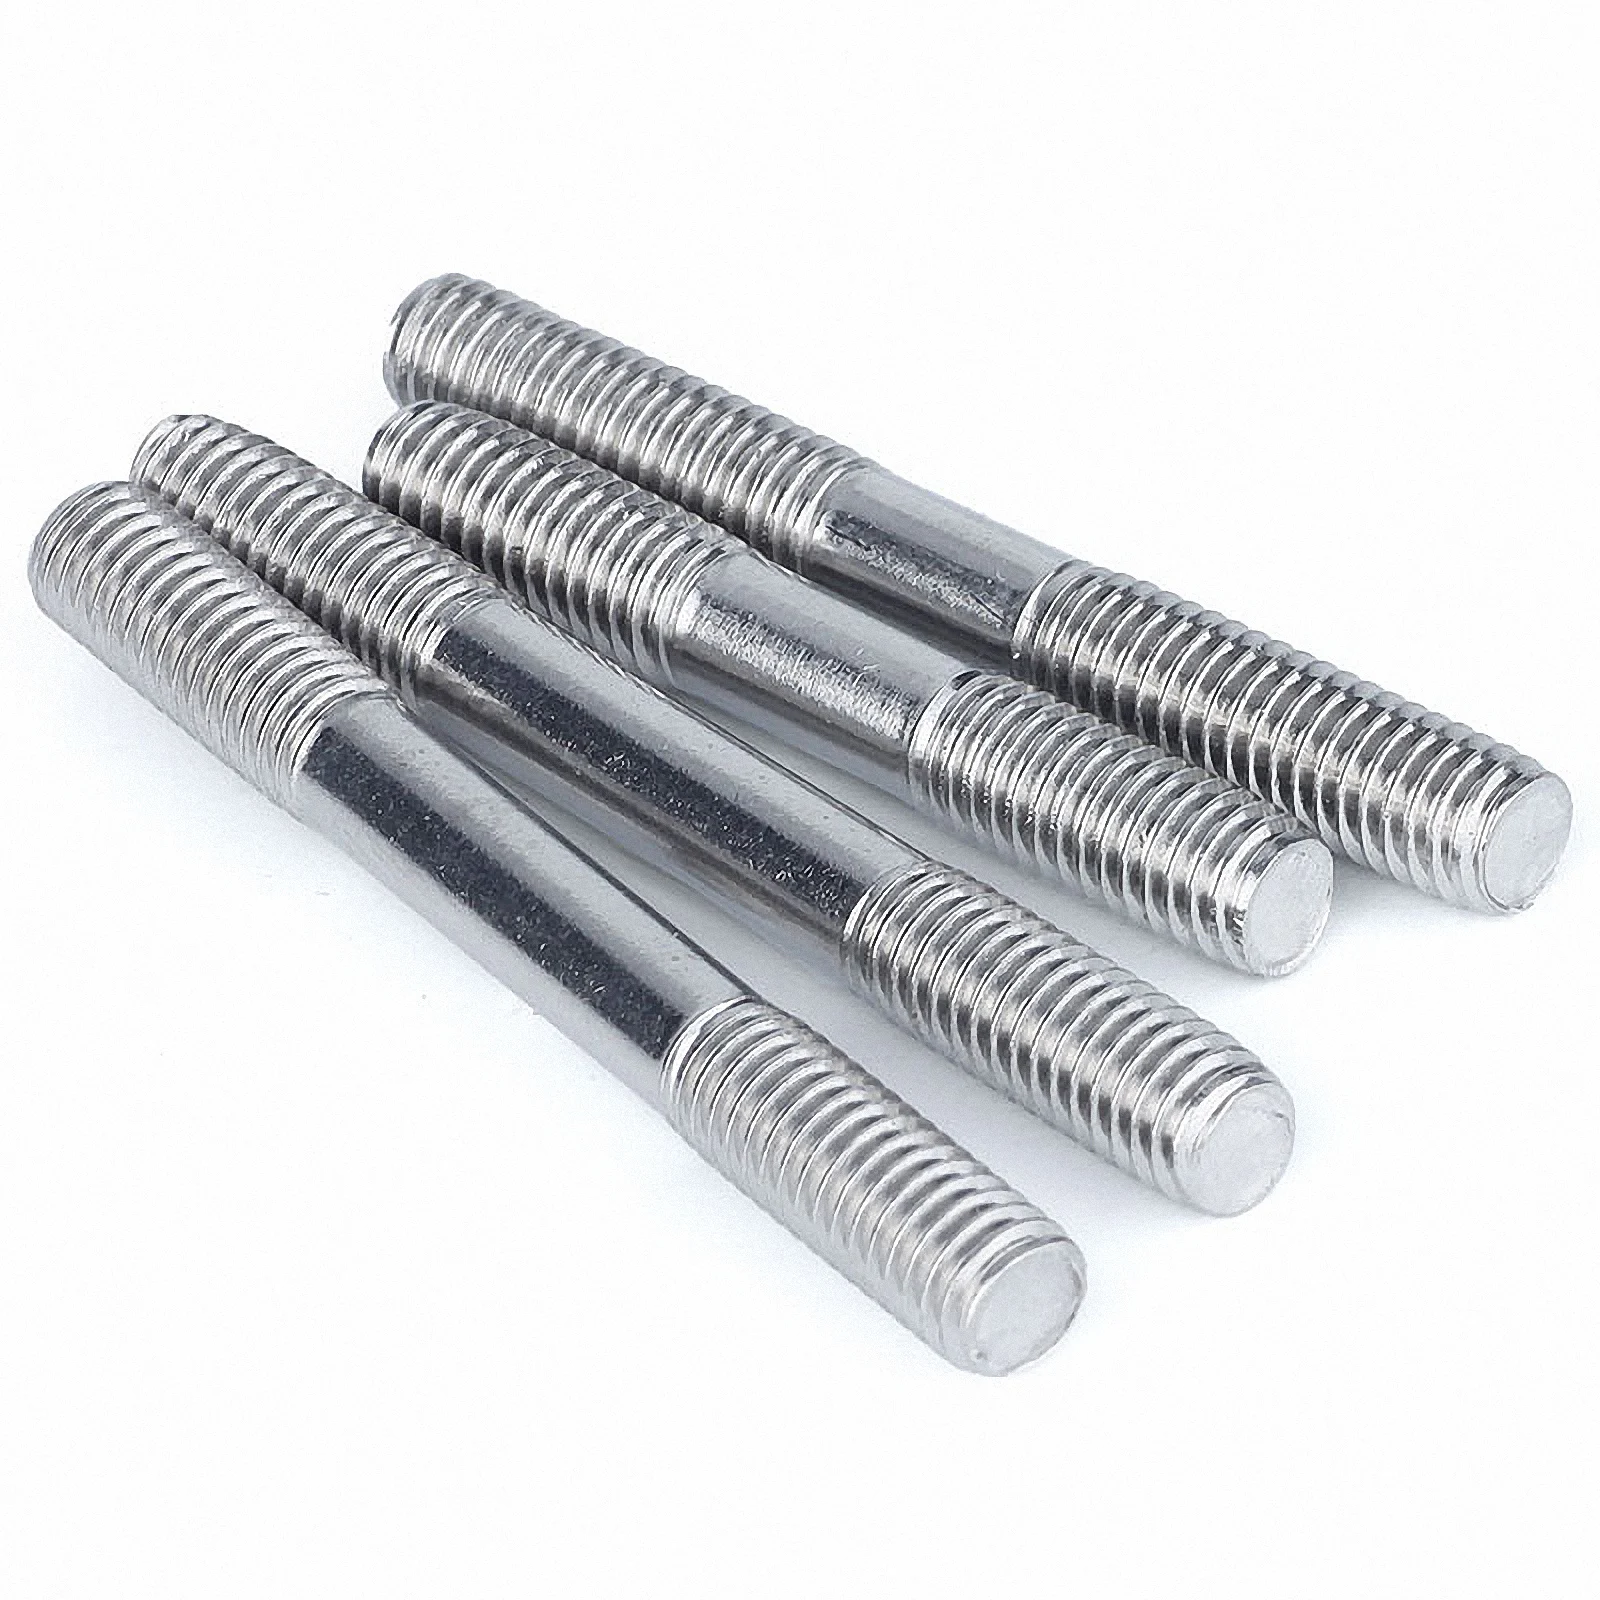 Rod Bolts A4 316 Stainless Steel M6 M8 M10 M12 Double End Threaded Stud Bar 